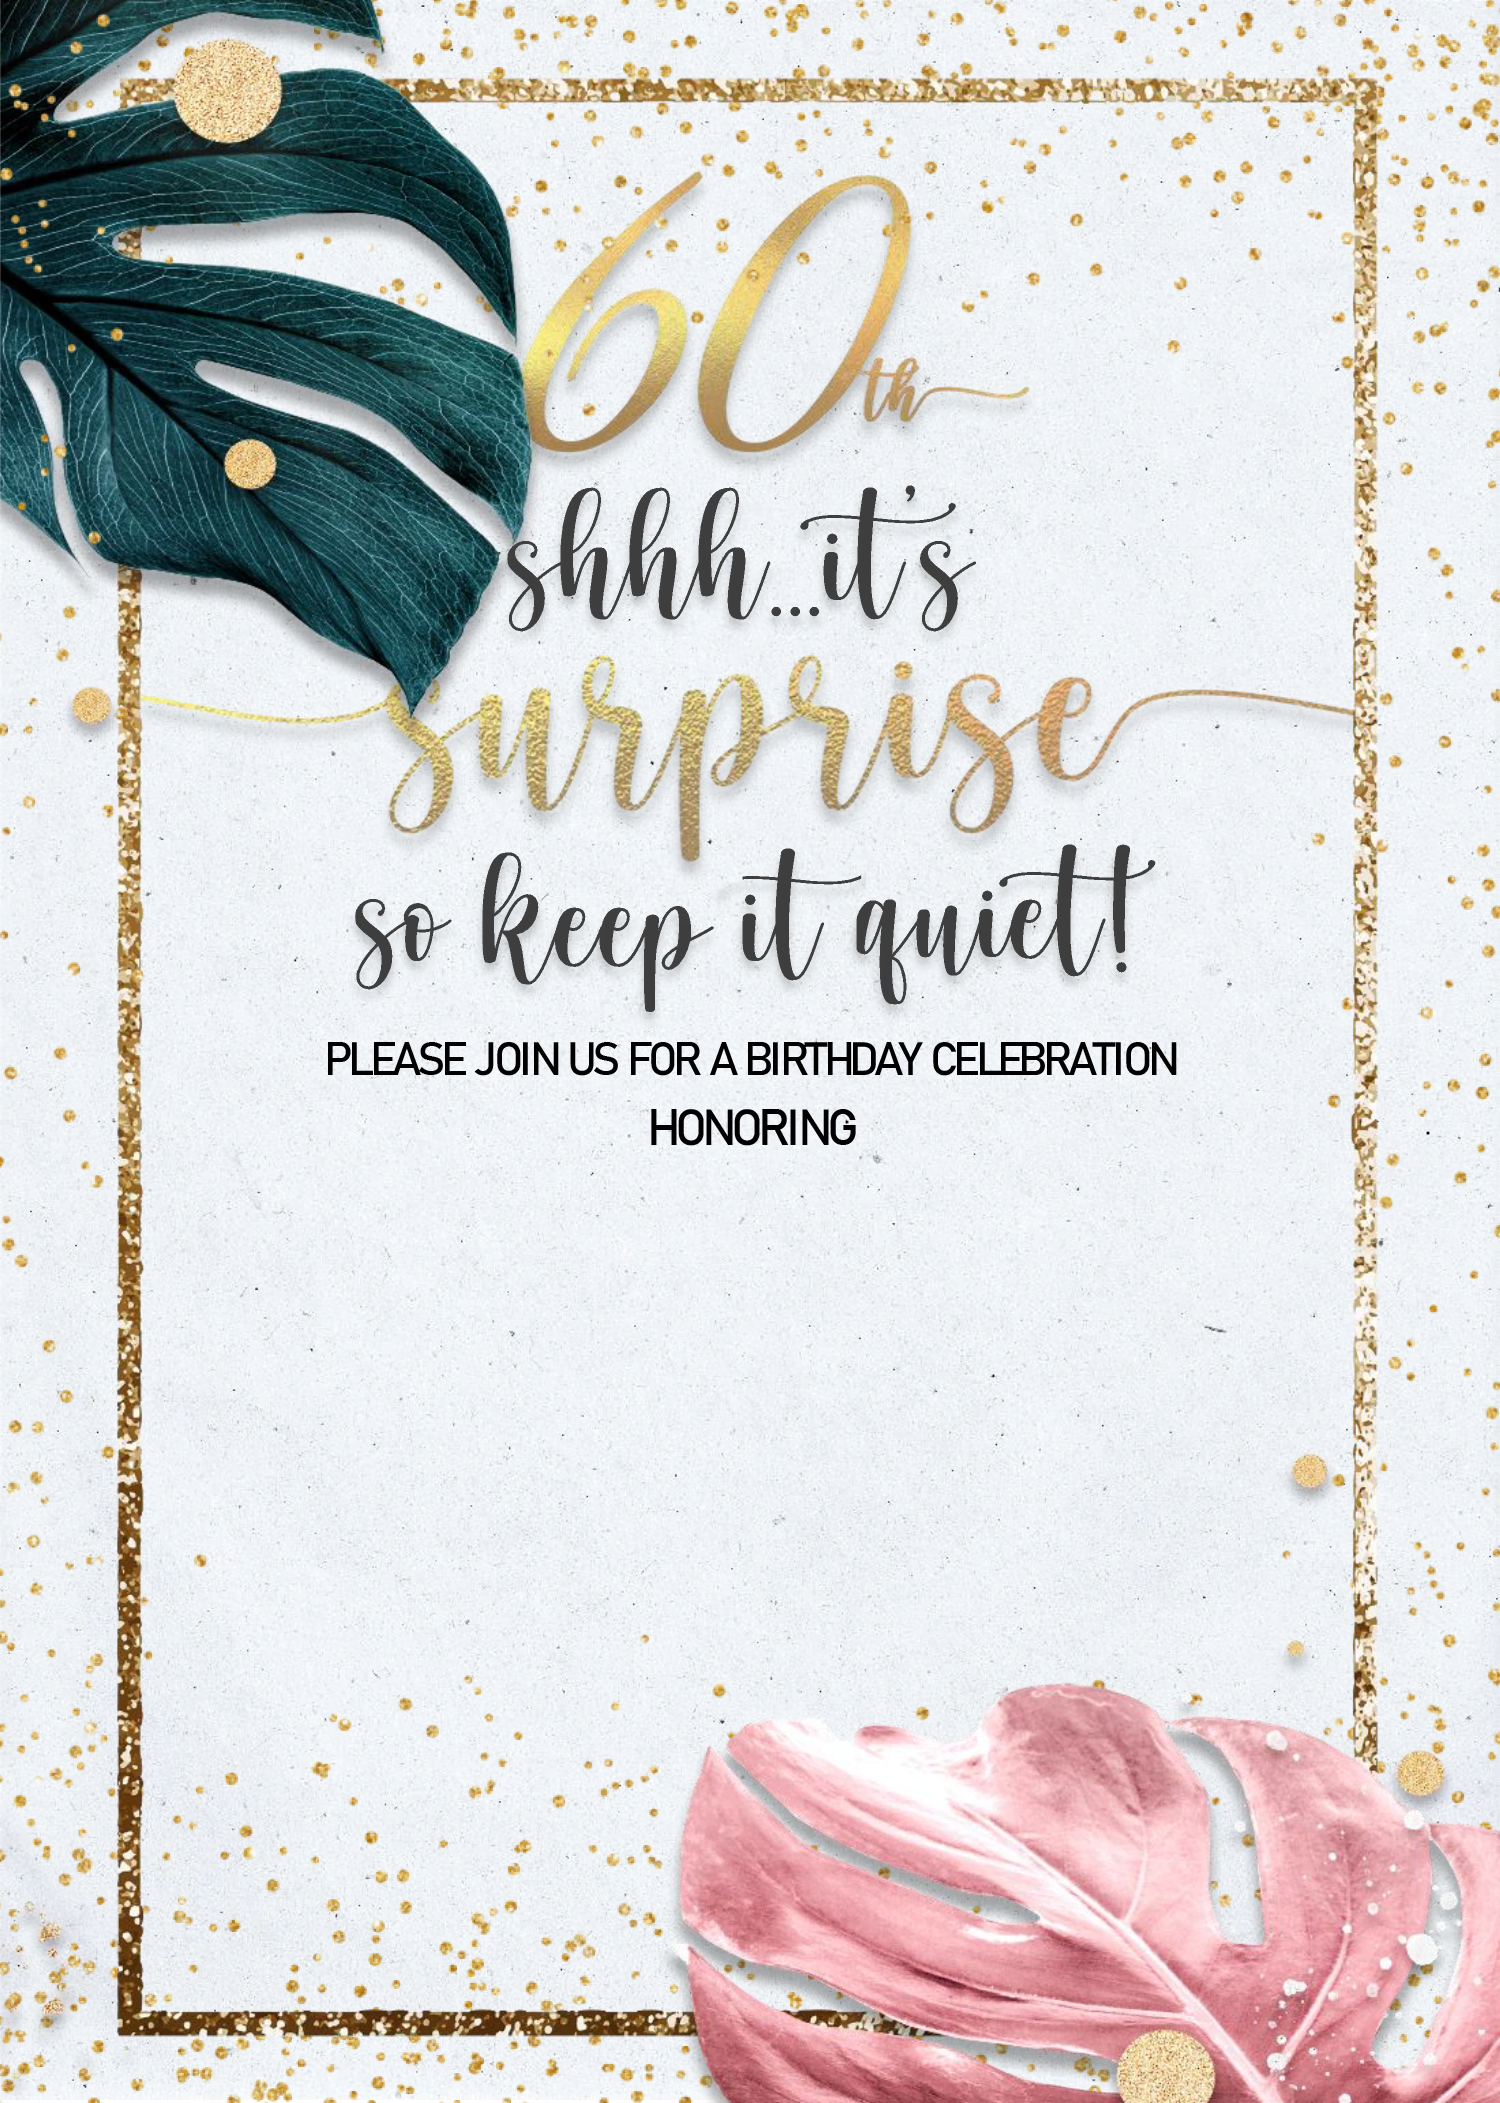 60th birthday party invitations free downloadable templates